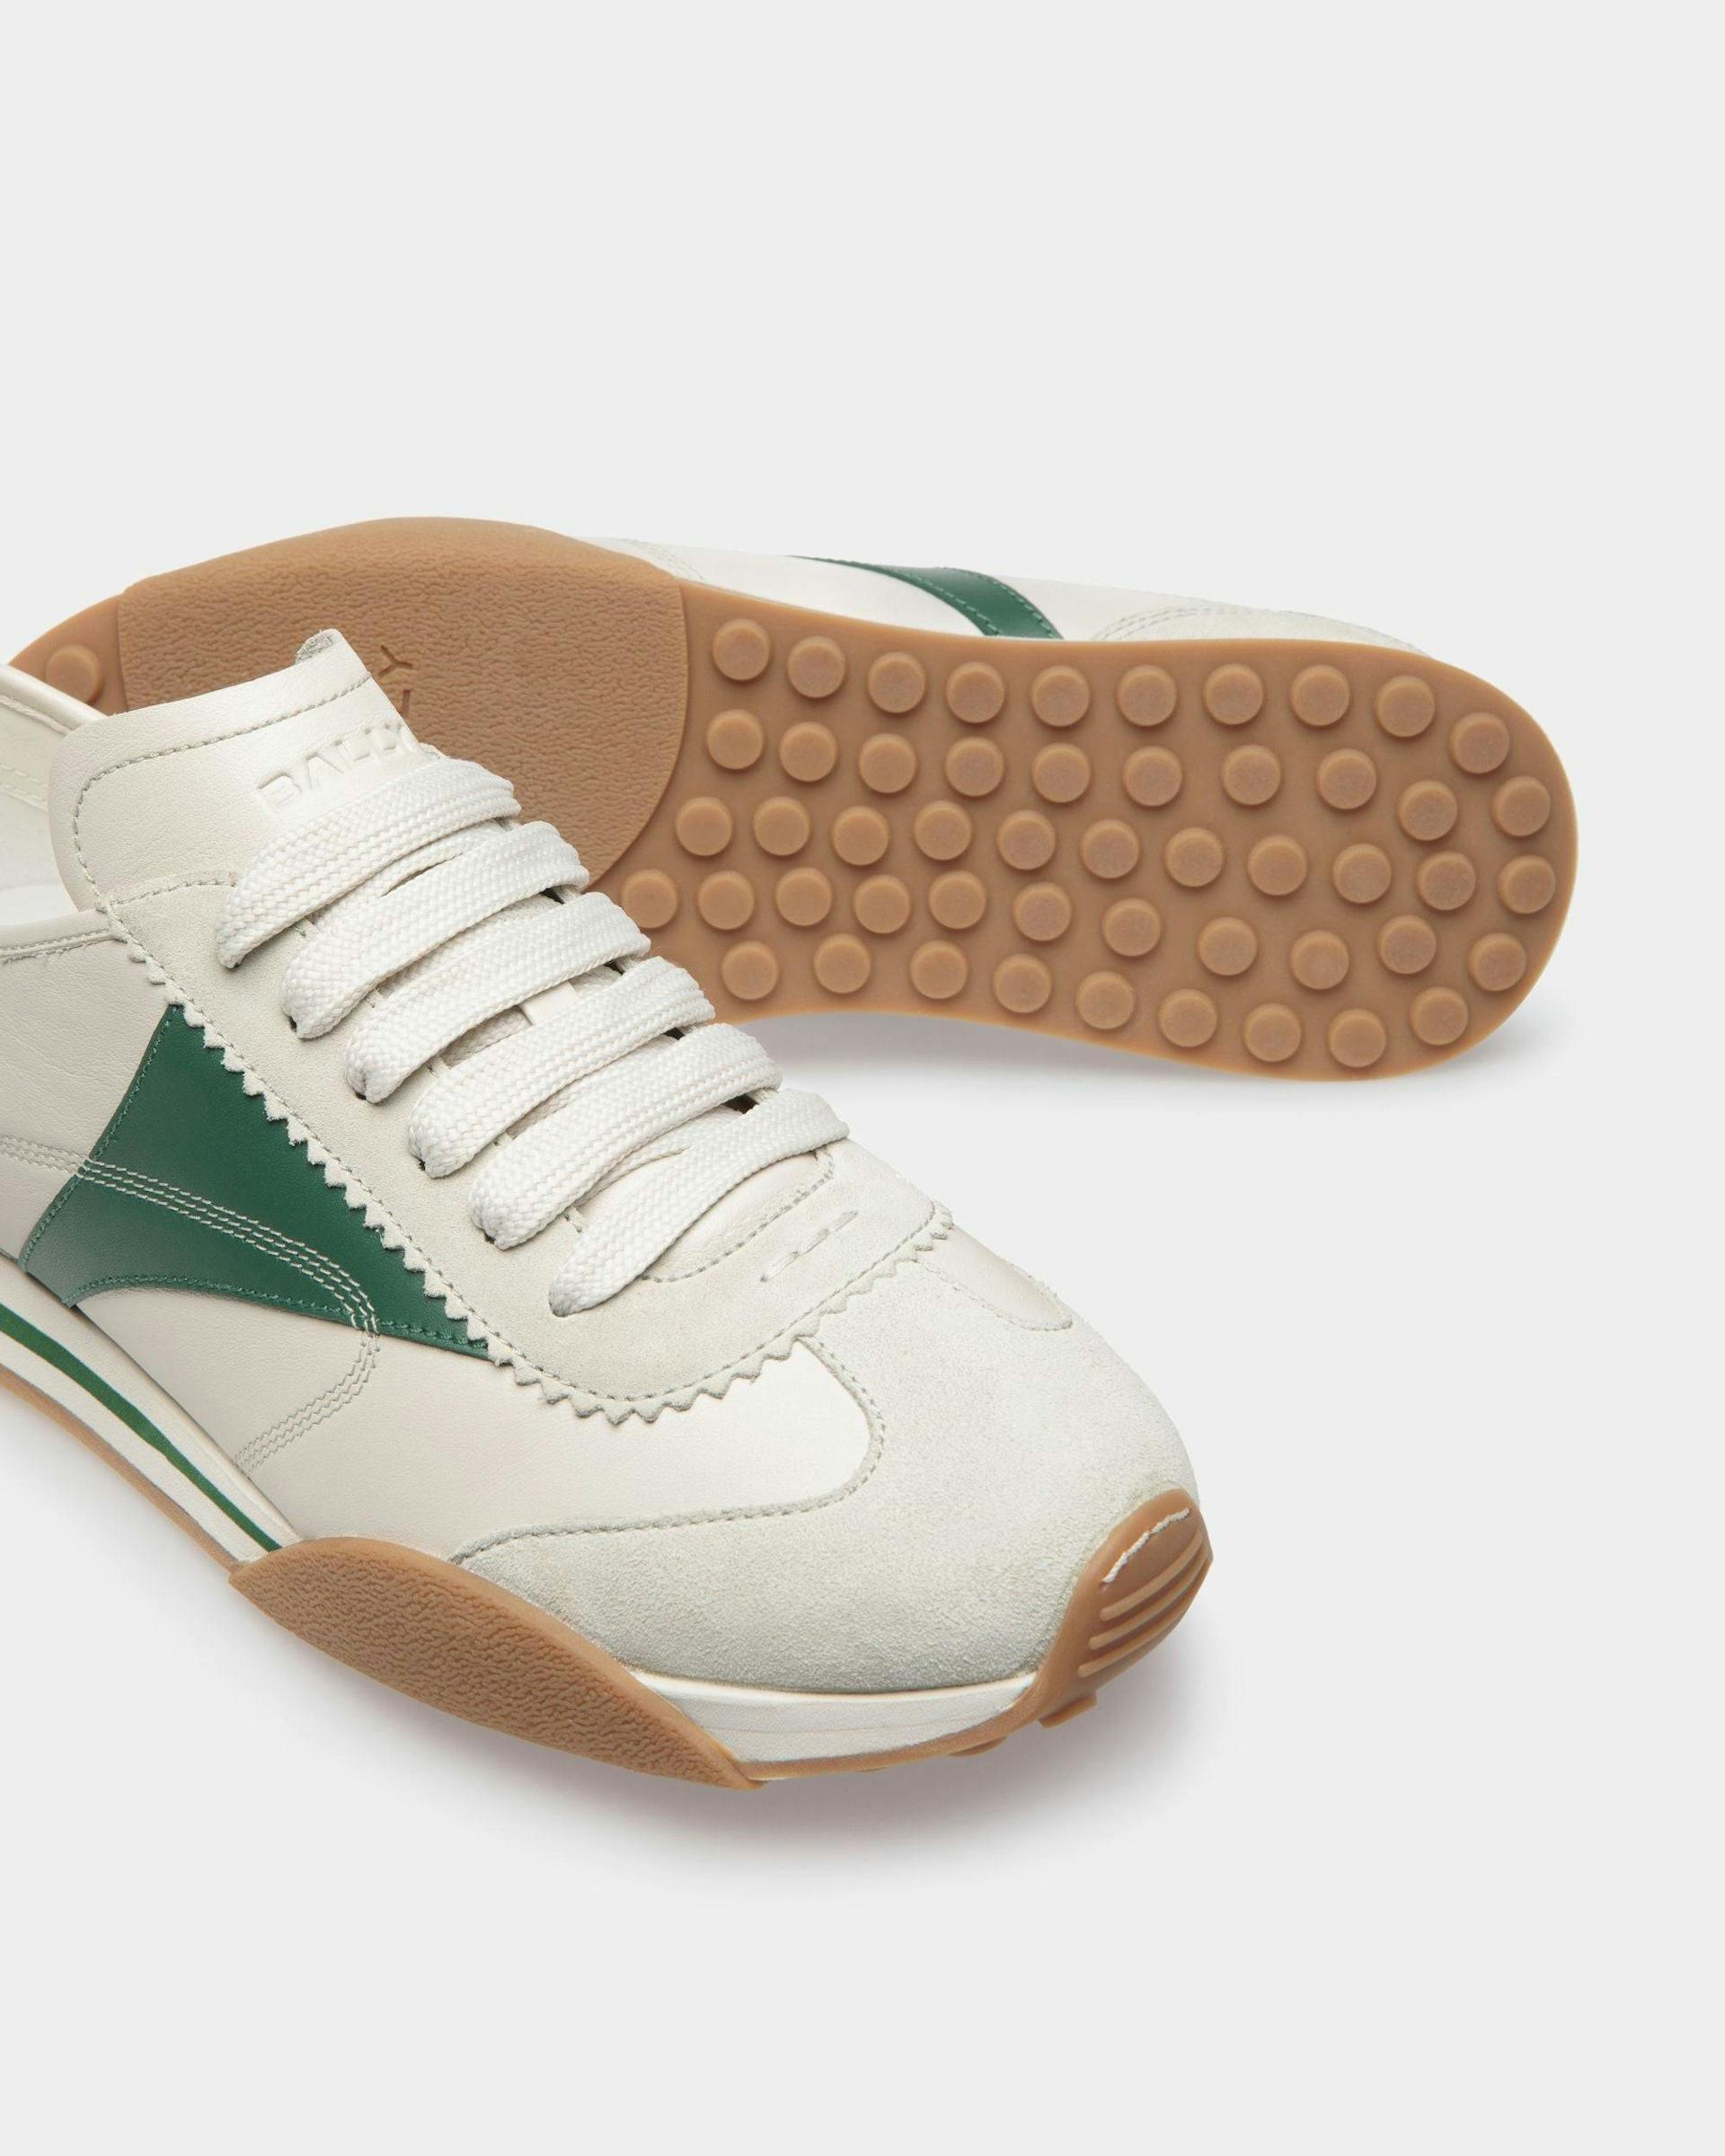 Men's Sussex Sneakers In Dusty White And Kelly Green Leather | Bally | Still Life Below